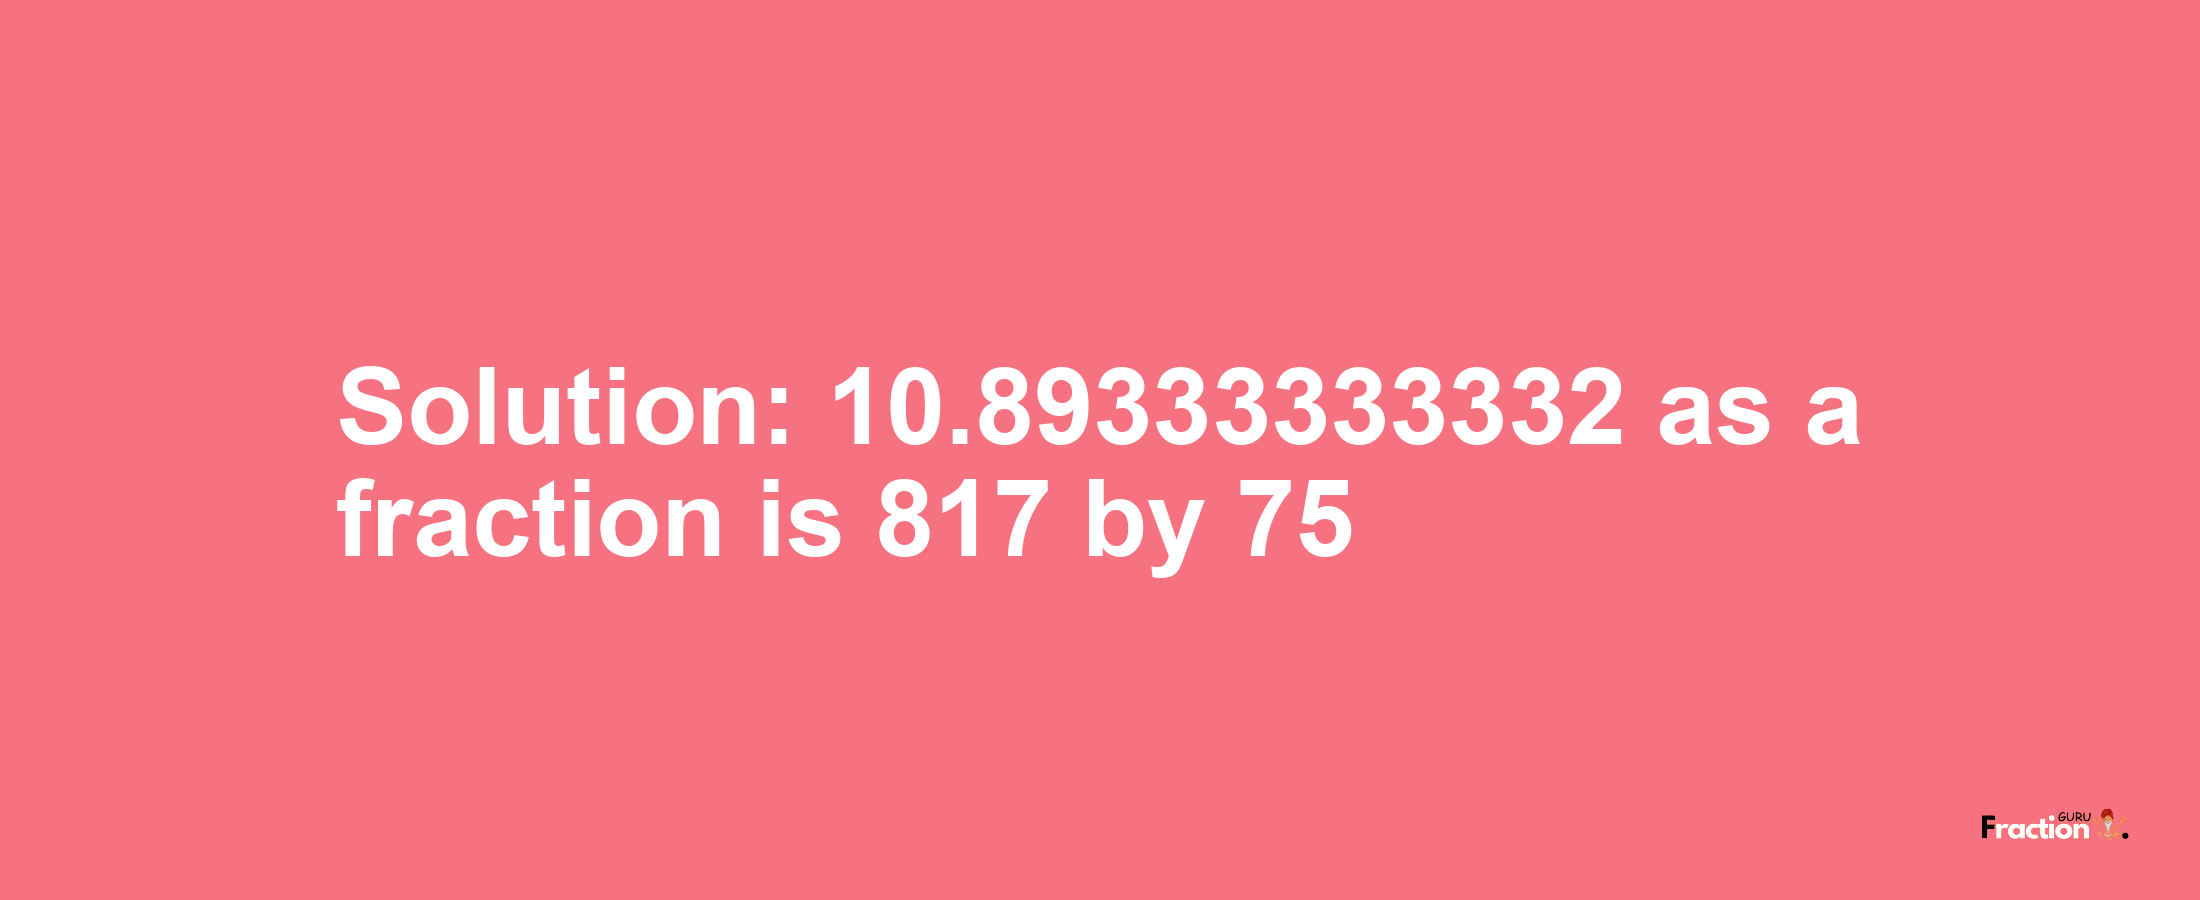 Solution:10.89333333332 as a fraction is 817/75